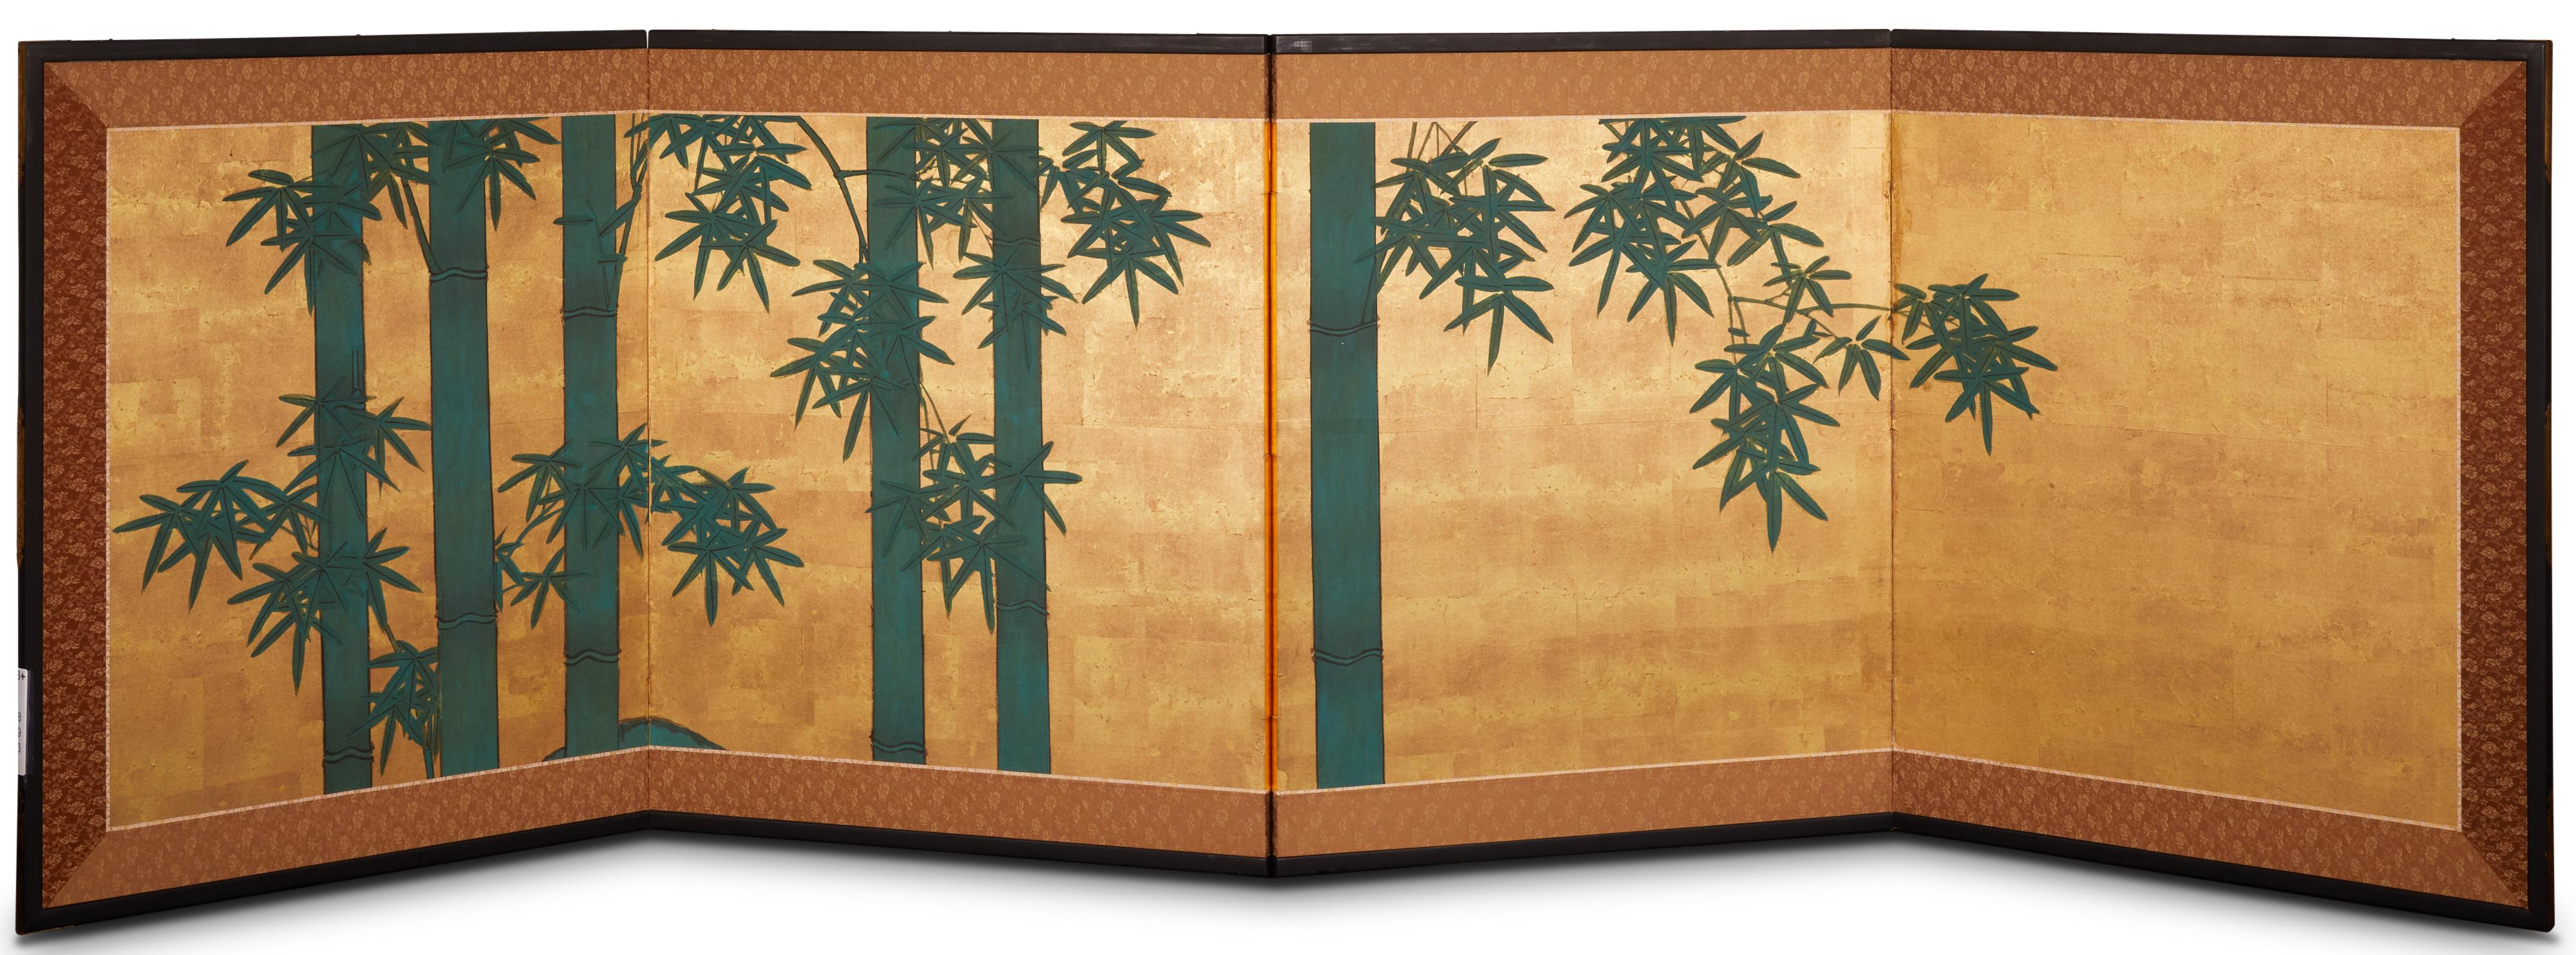 Brocade Japanese Four Panel Screen: Bamboo on Gold For Sale